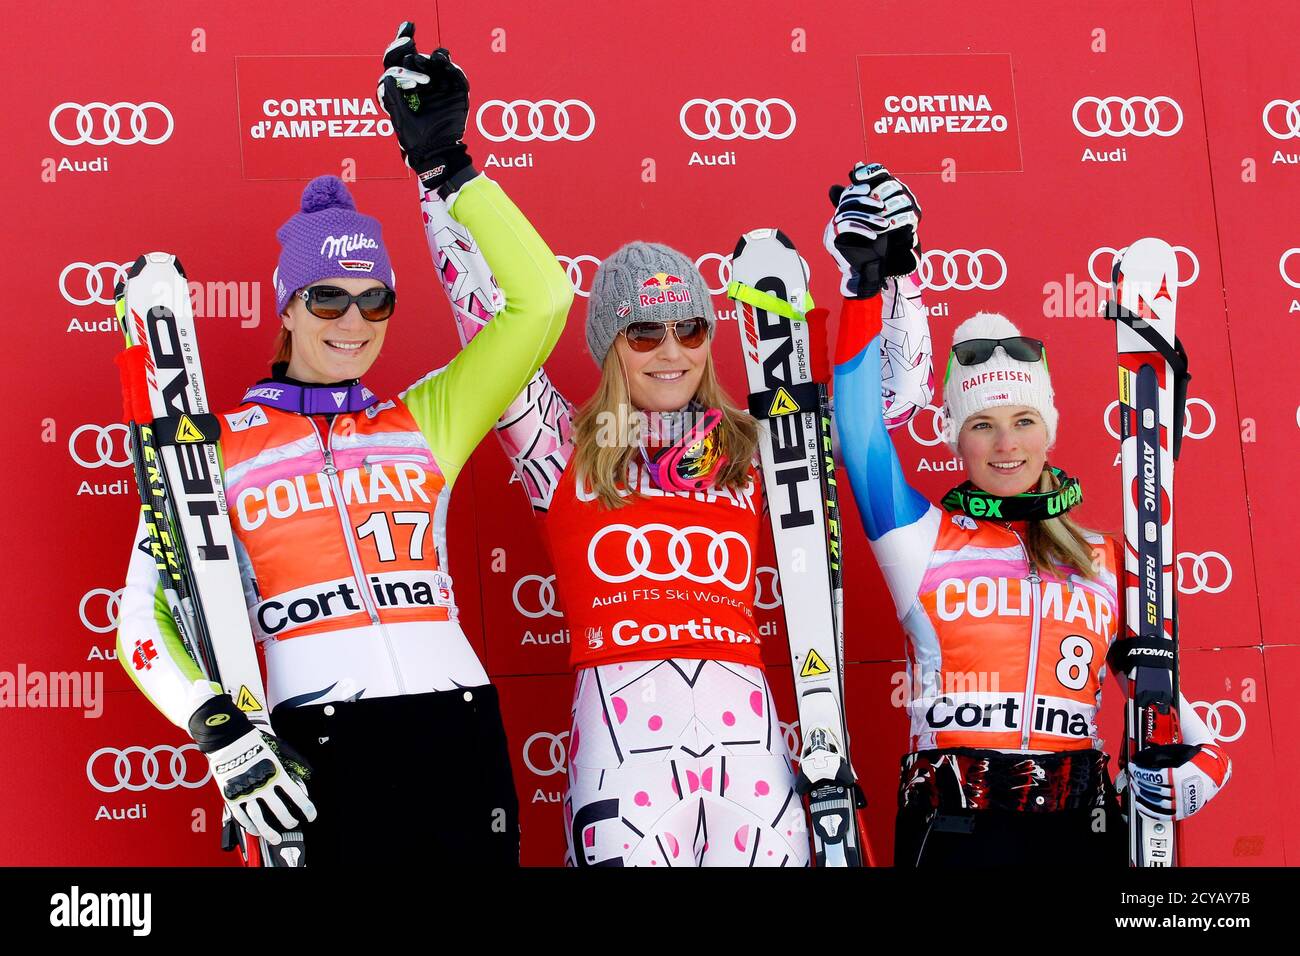 Lindsey Vonn (C) of the U.S., winner of the women's Super-G event at the FIS Alpine Skiing World Cup, poses on the podium with second placed Maria Riesch (L) of Germany and third placed Lara Gut of Switzerland, in Cortina D'Ampezzo January 23, 2011.  REUTERS/Giampiero Sposito (ITALY - Tags: SPORT SKIING) Banque D'Images